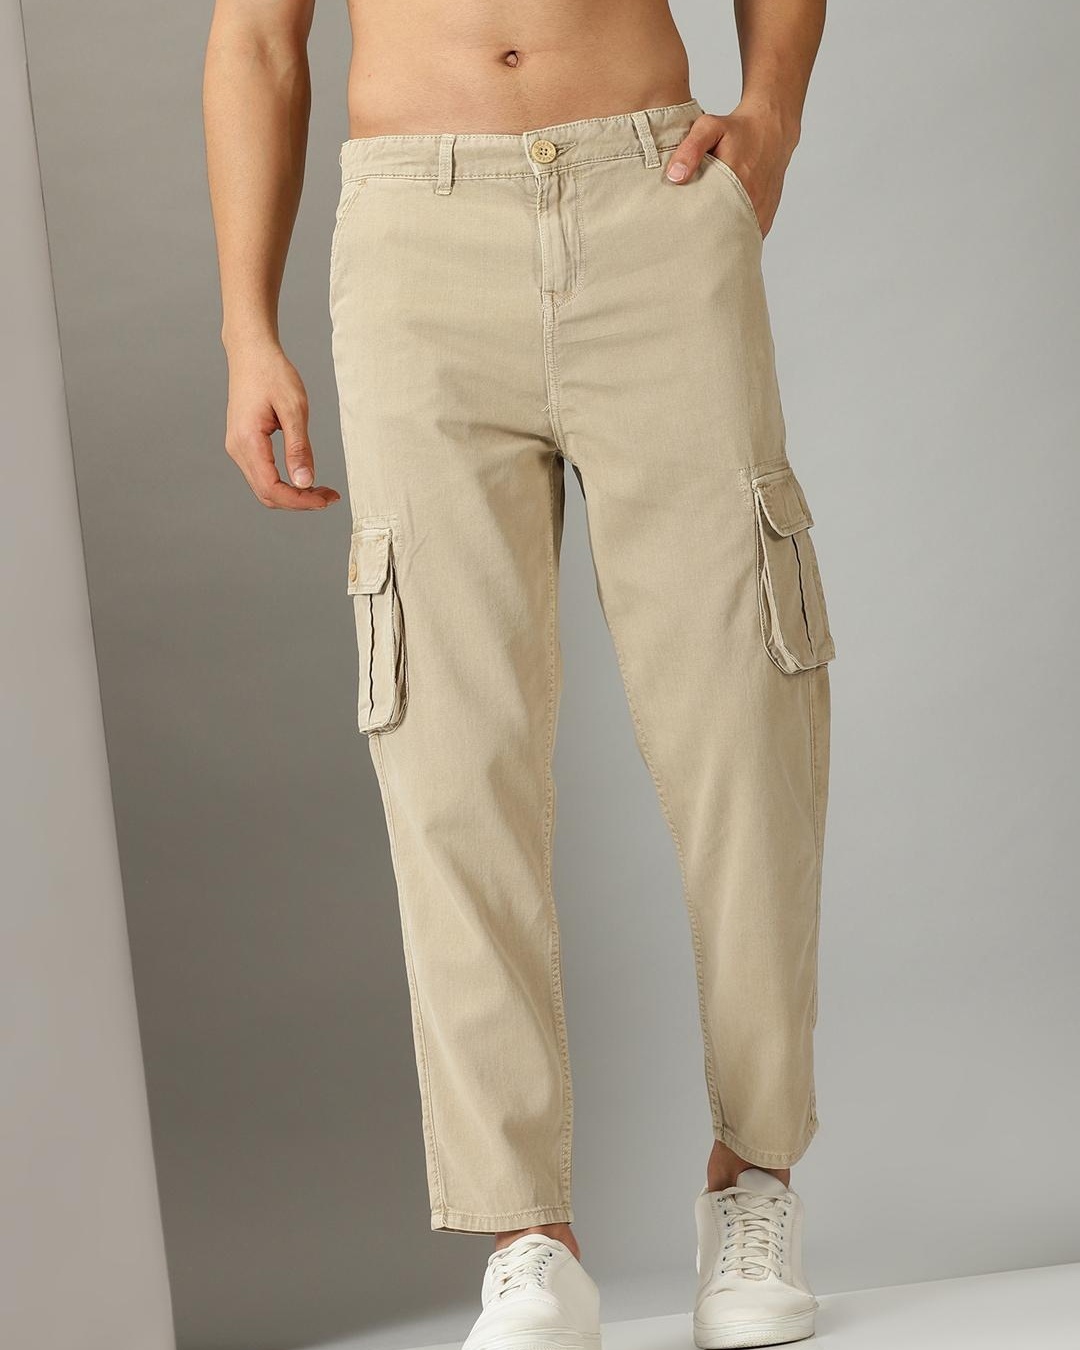 Sapper Cargos  Buy Sapper Mens Beige Cotton Solid Elasticated Cargo Pant  Online  Nykaa Fashion